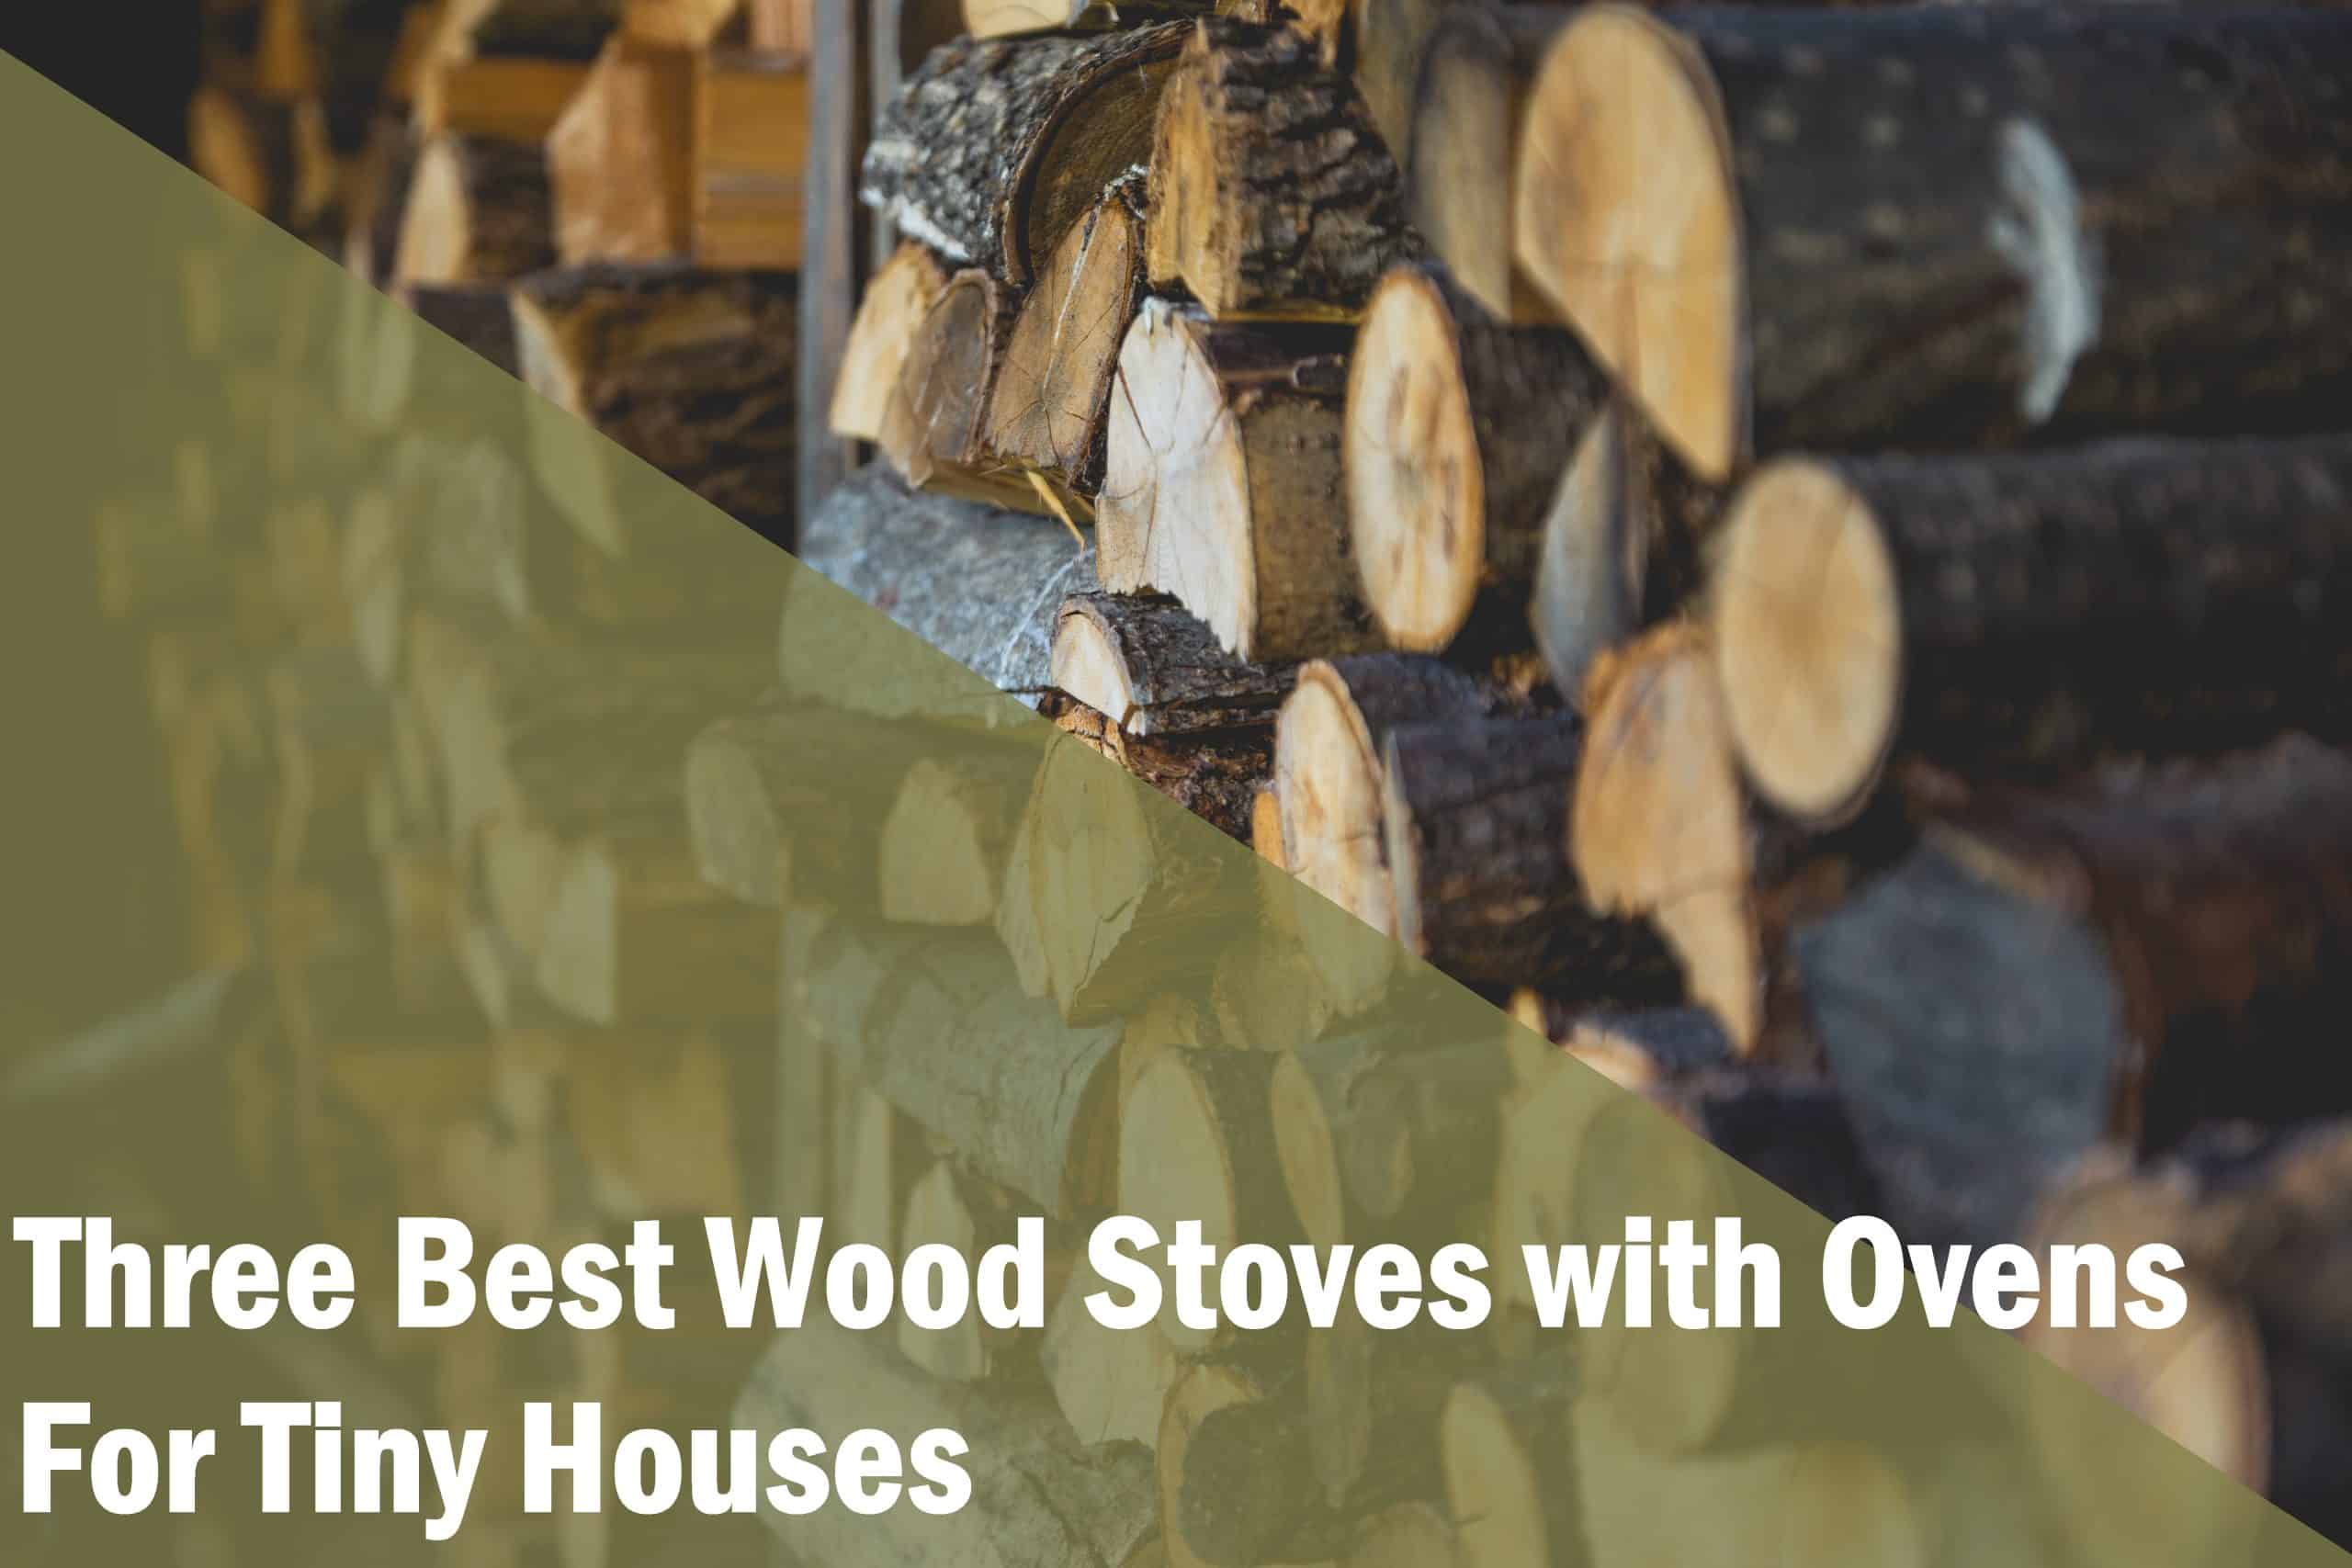 Three Best Wood Stoves With Ovens for Tiny Houses